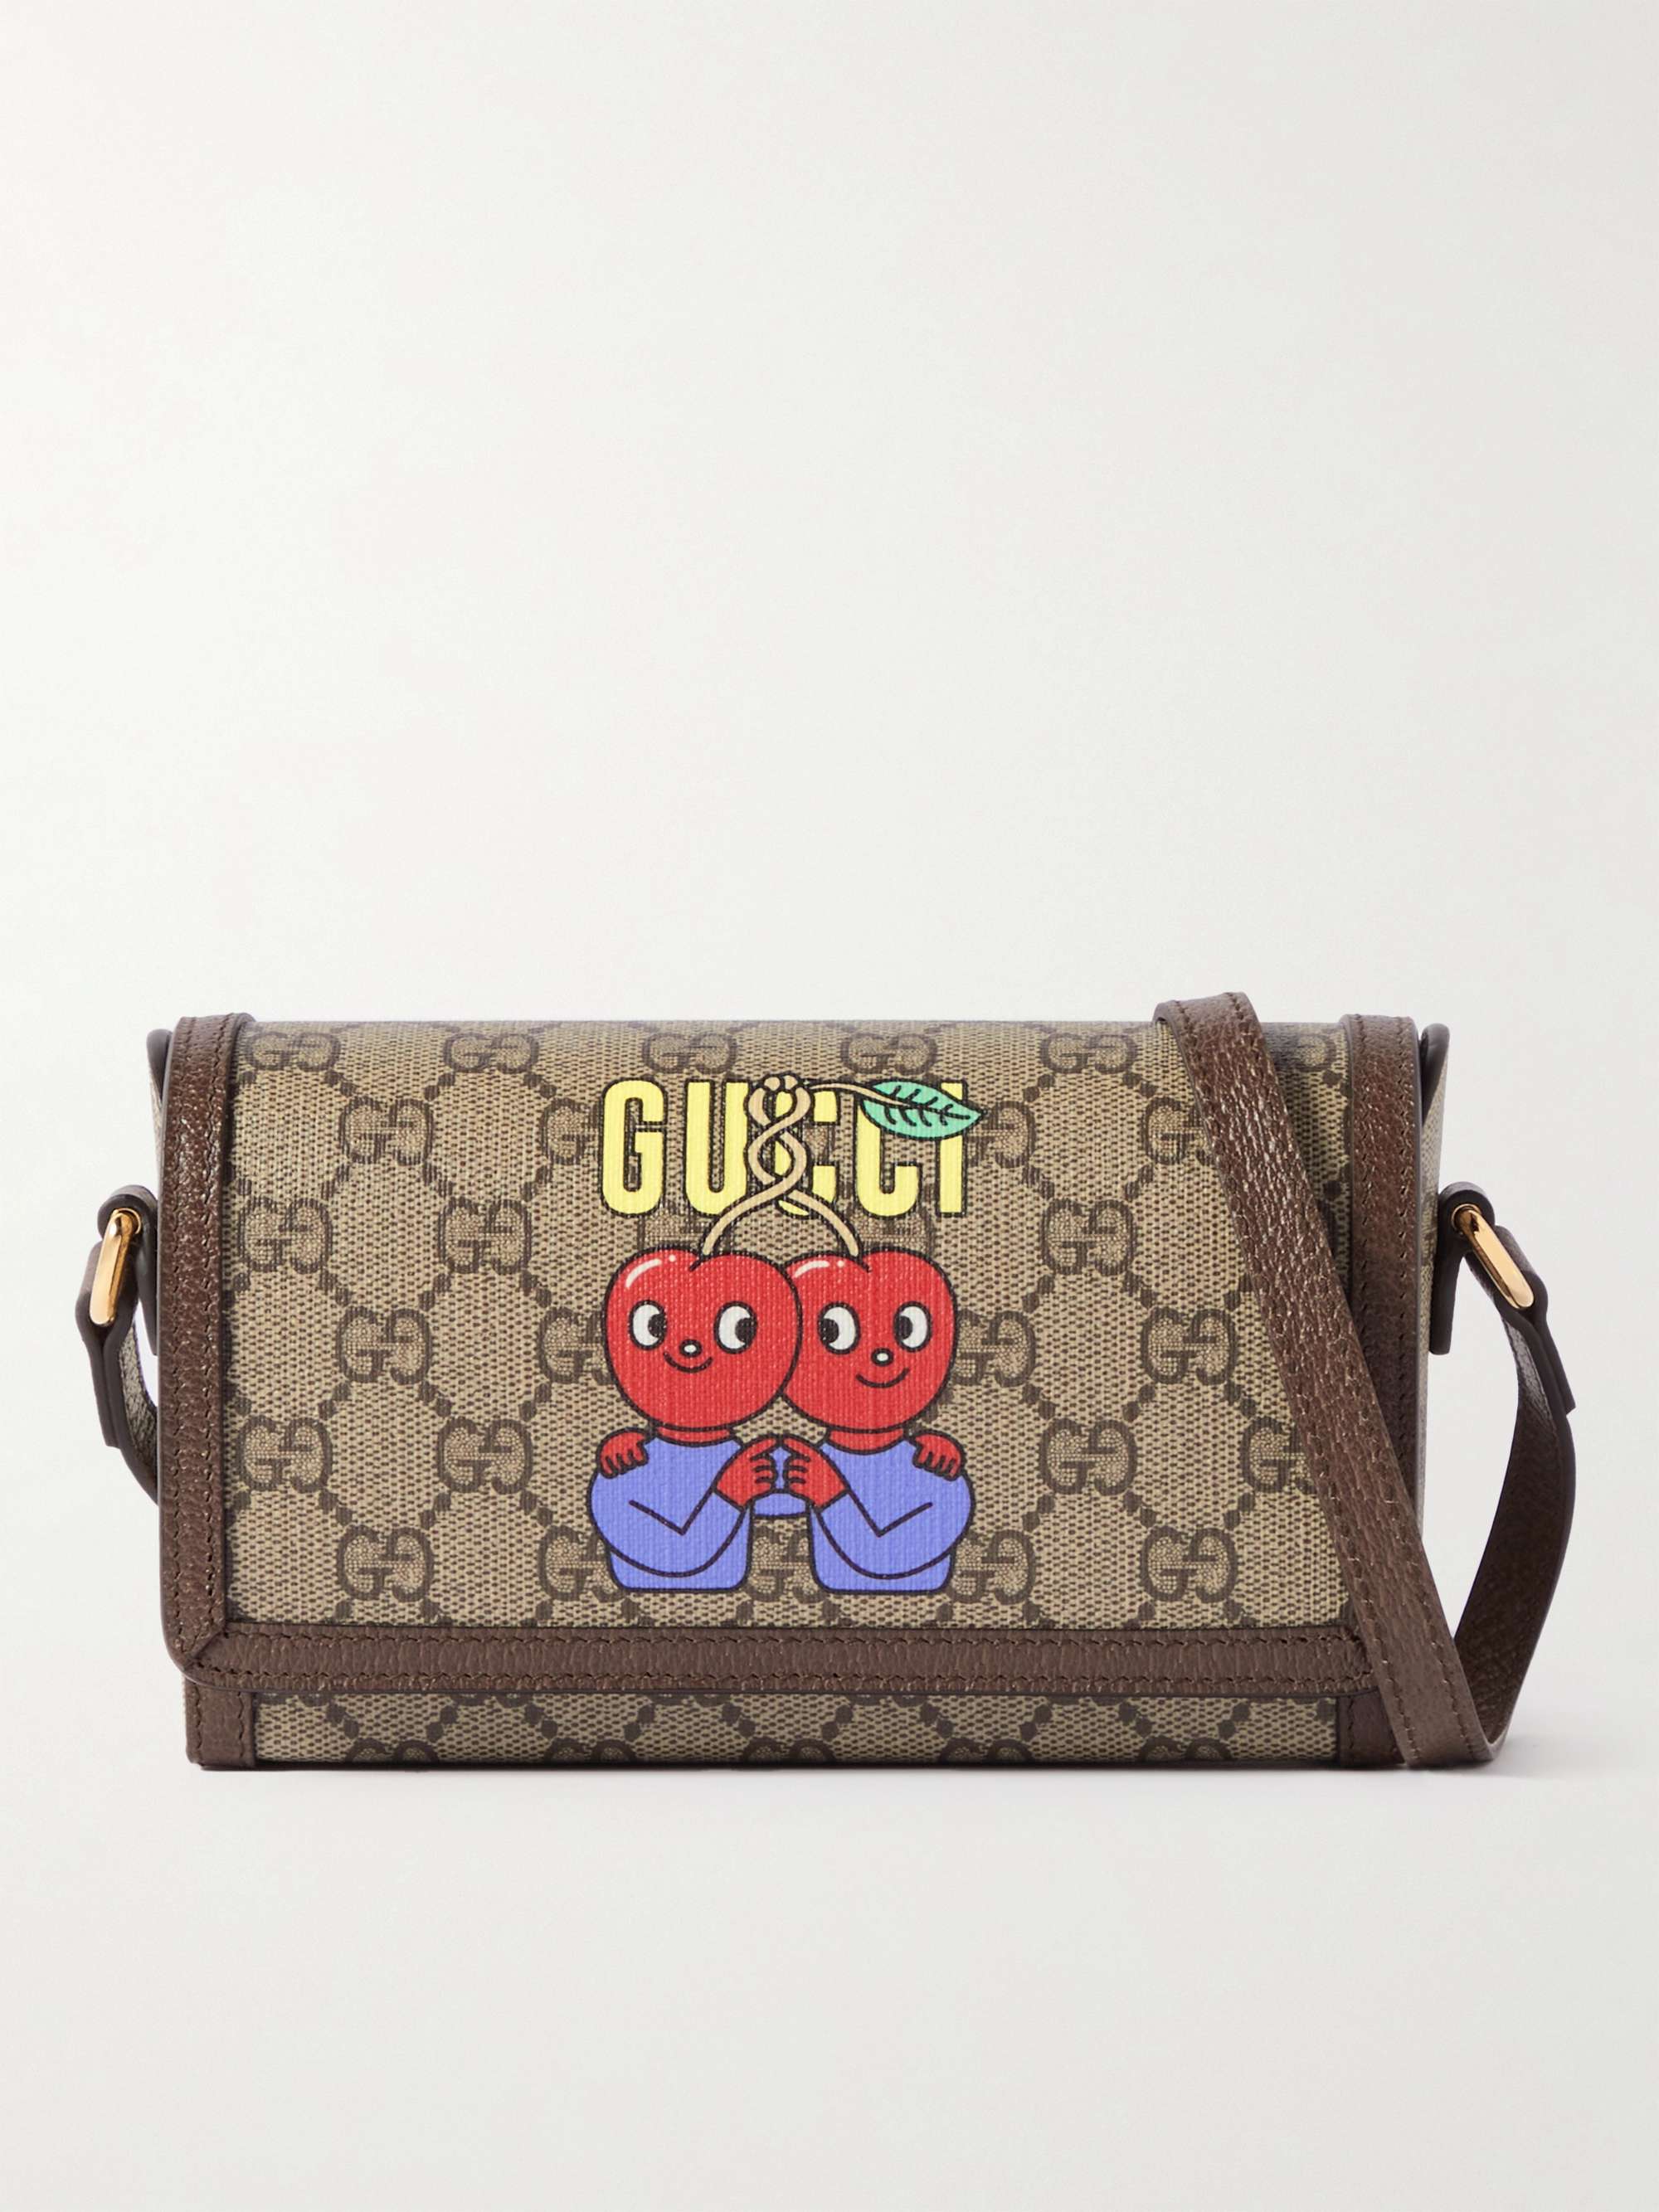 GUCCI Mini Leather-Trimmed Printed Monogrammed Coated-Canvas Messenger Bag